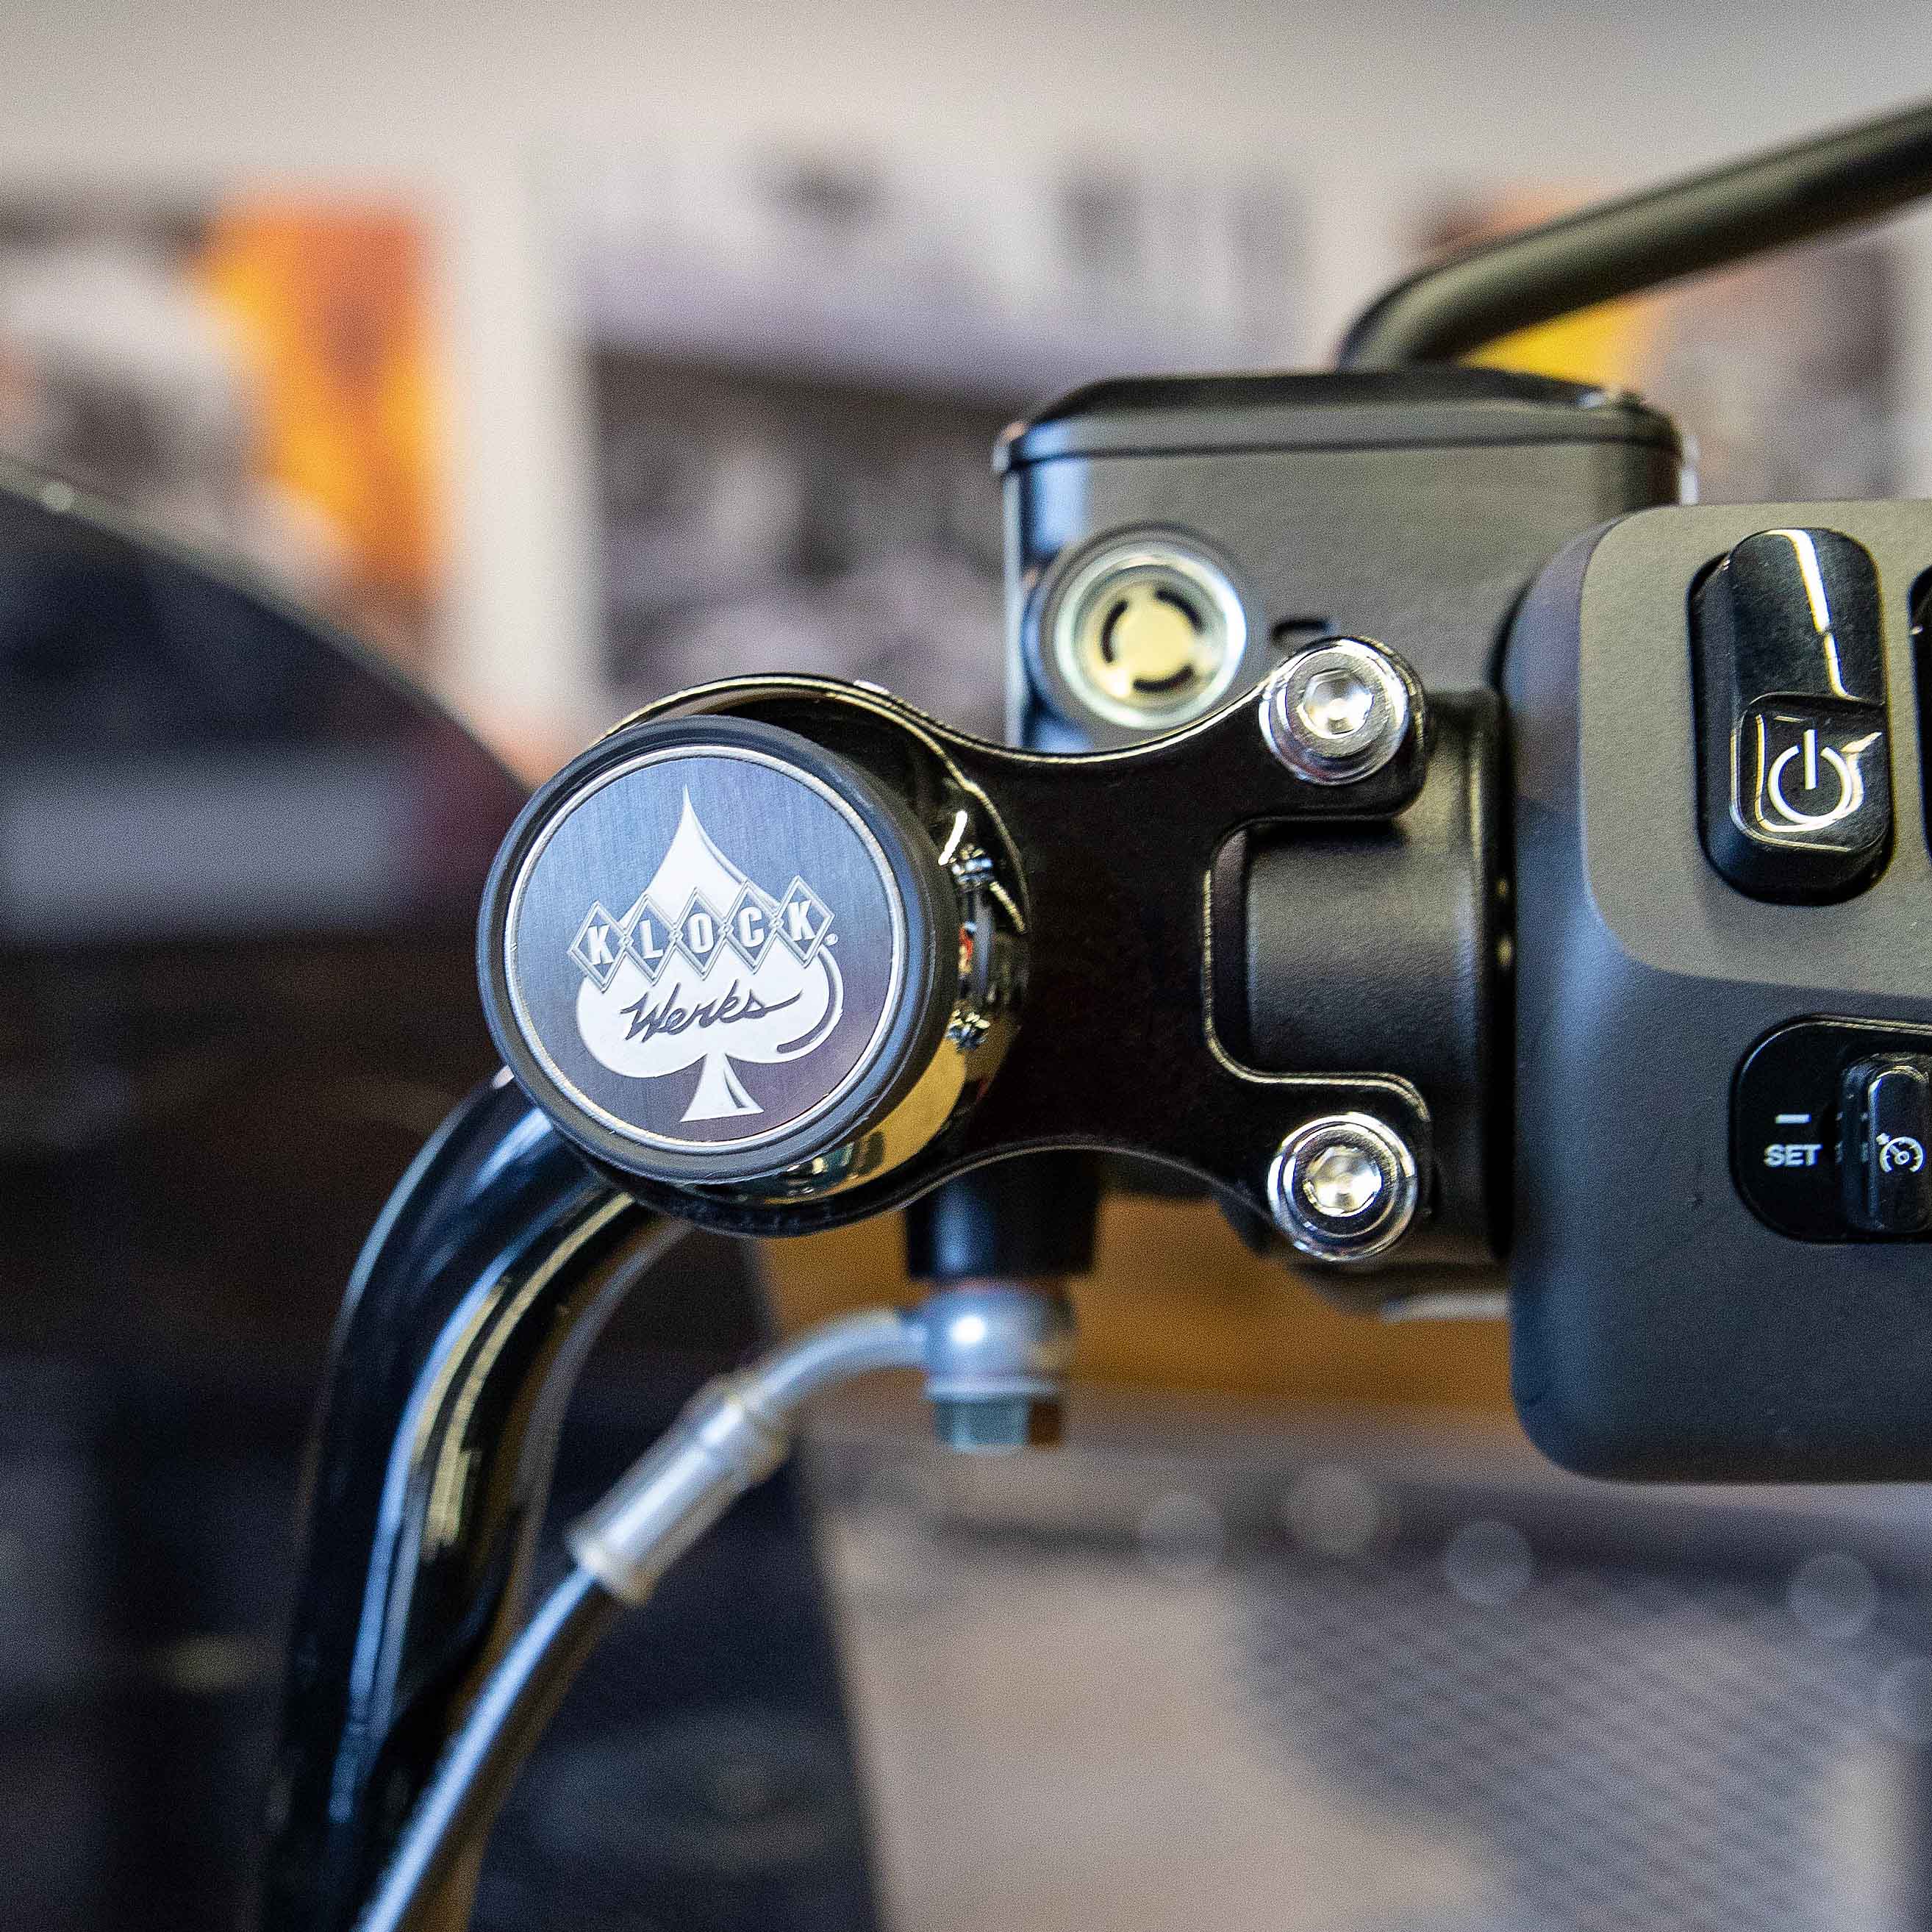 Black Ambidextrous Handlebar Magnetic Phone Mount for Indian® Scout® Motorcycles shown on bike(Black Ambidextrous Mount on bike)